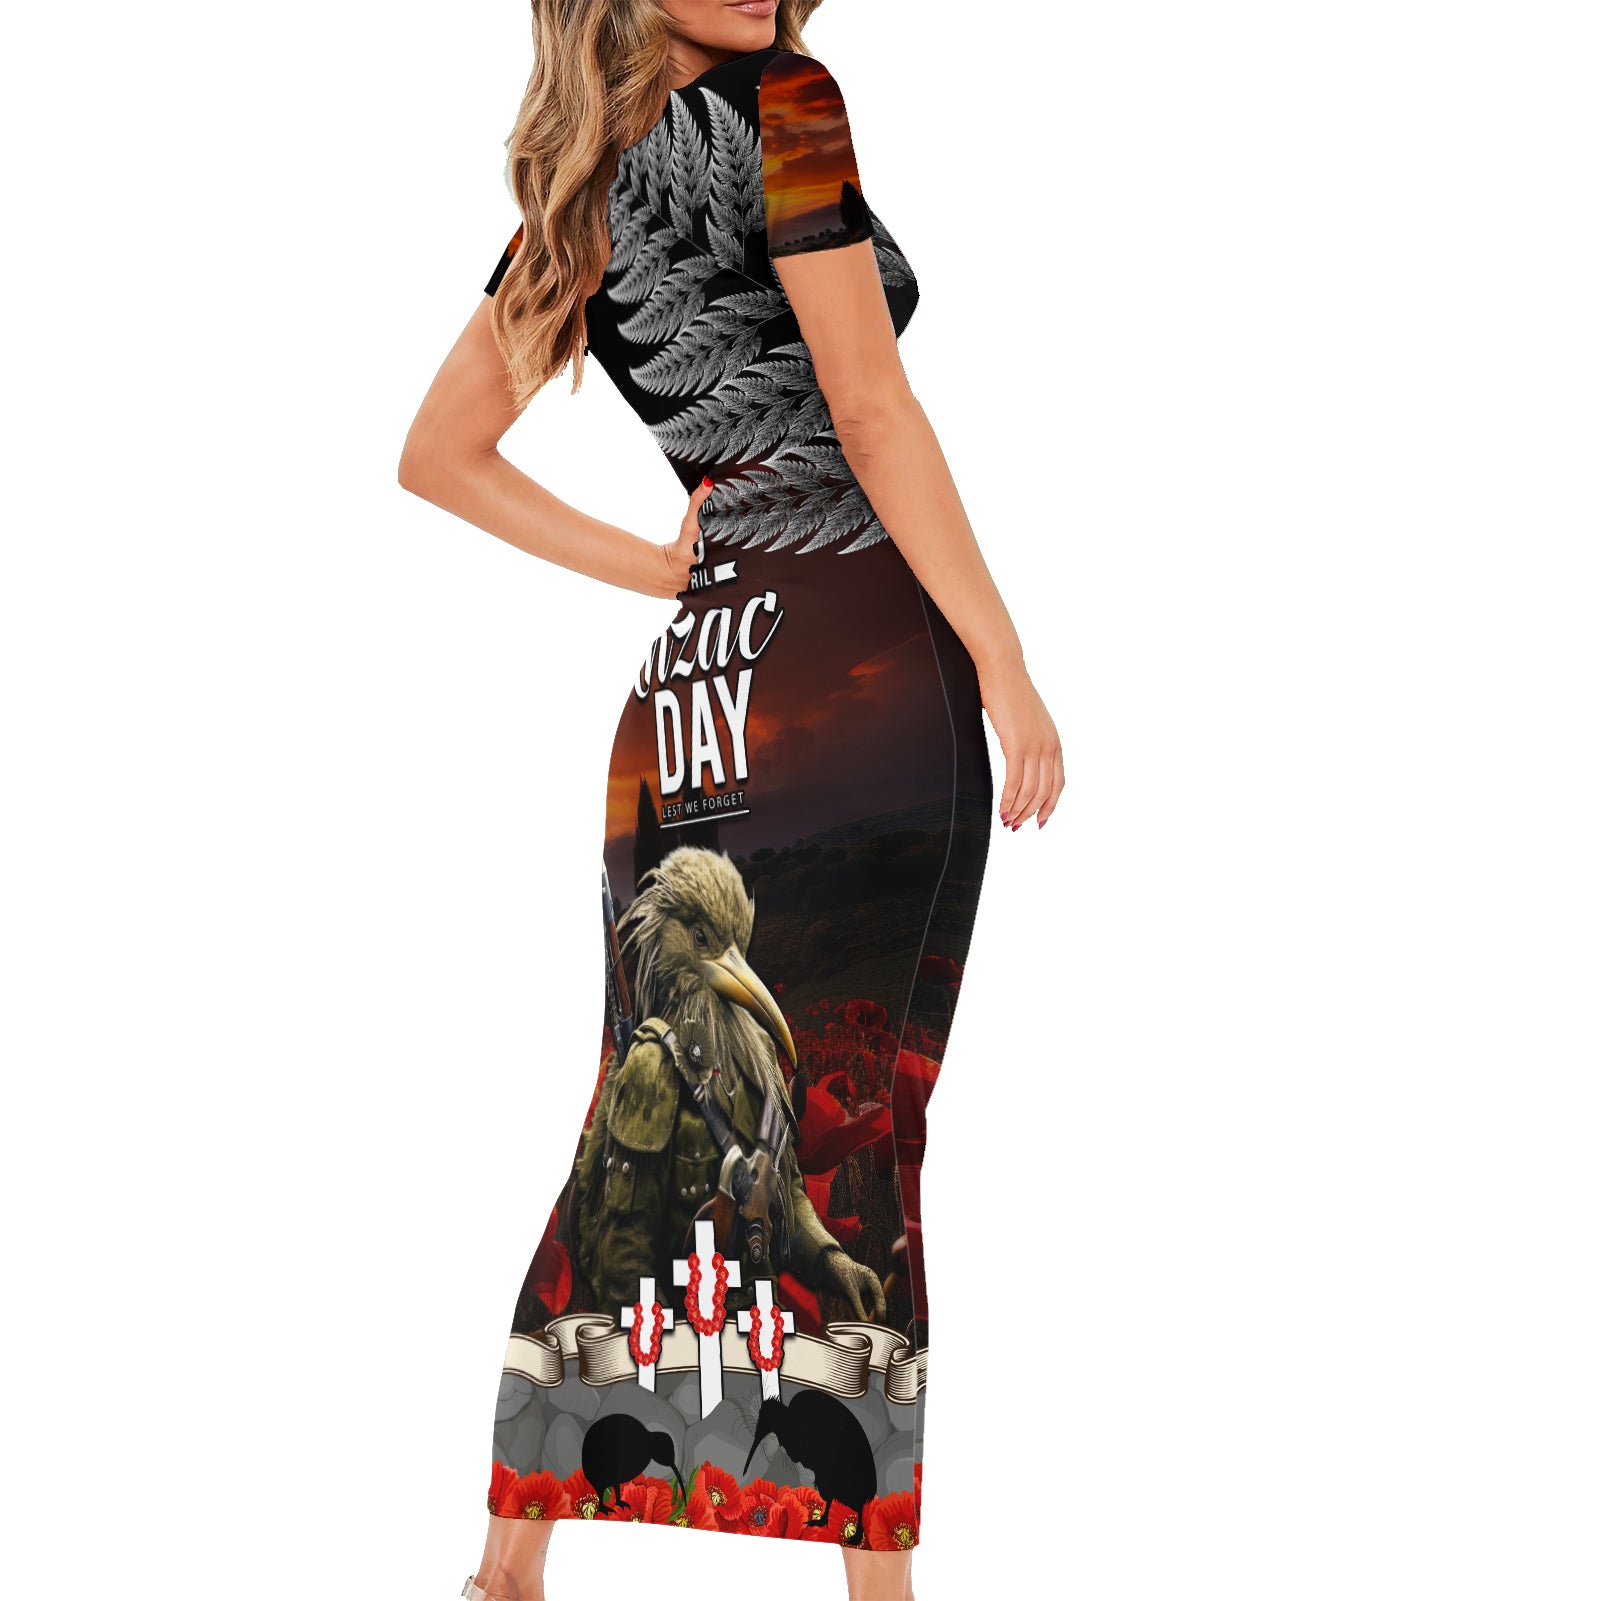 New Zealand ANZAC Day Short Sleeve Bodycon Dress The Ode of Remembrance and Silver Fern